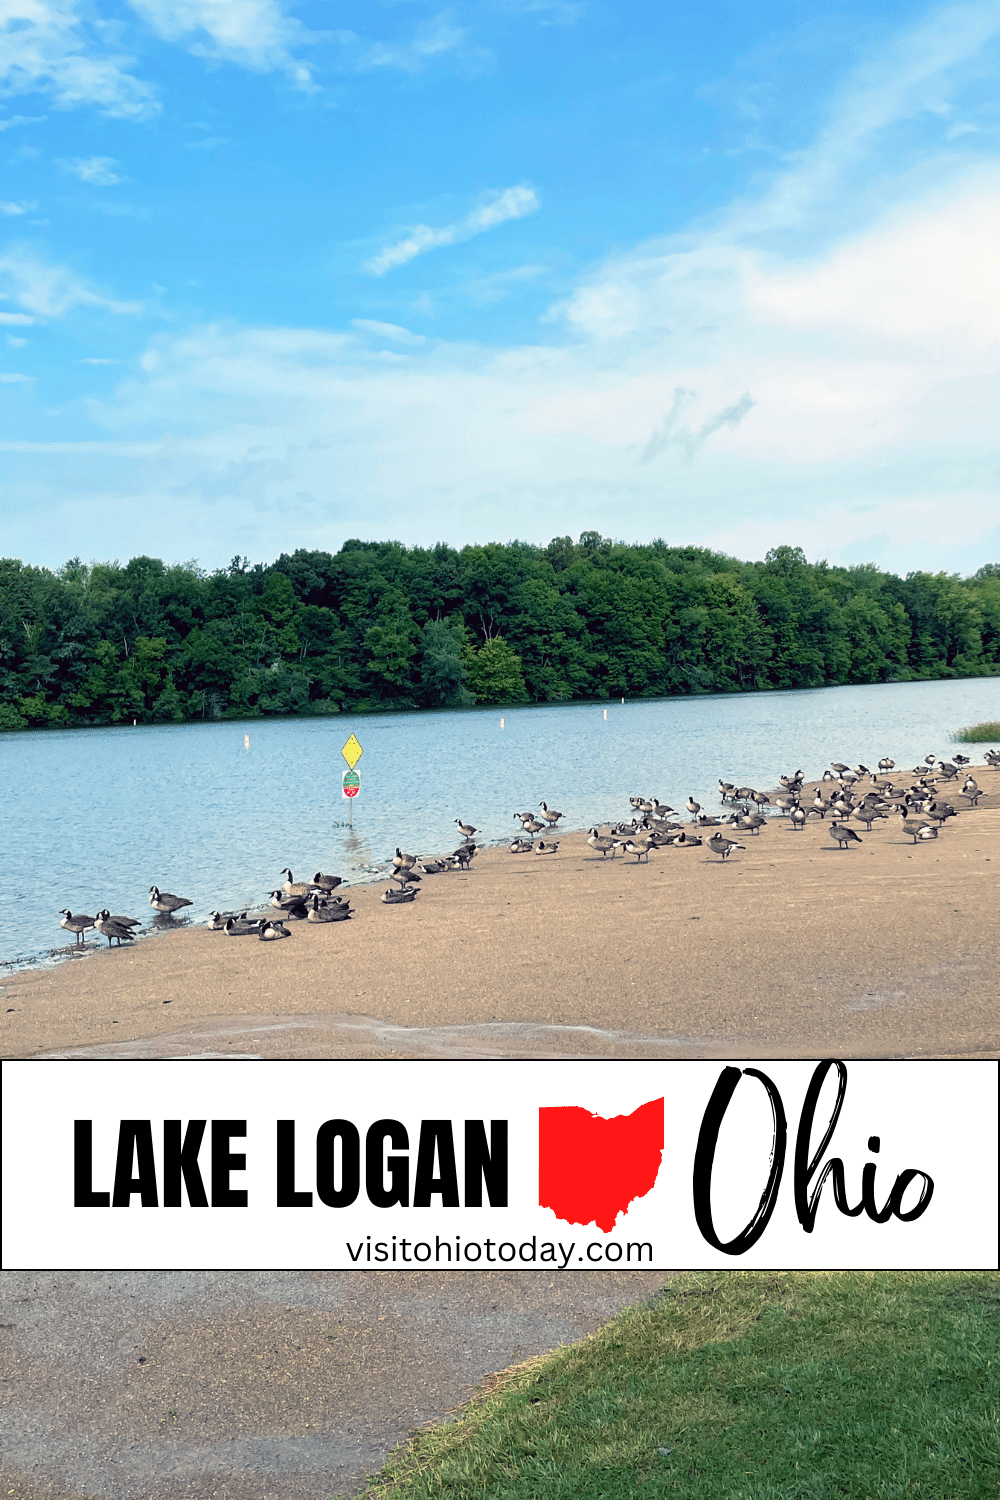 vertical image for pinterest with a photo of Lake Logan Marina with the river and birds on the sandy bank with trees on the opposite bank Photo credit: Cindy Gordon of VisitOhioToday.com